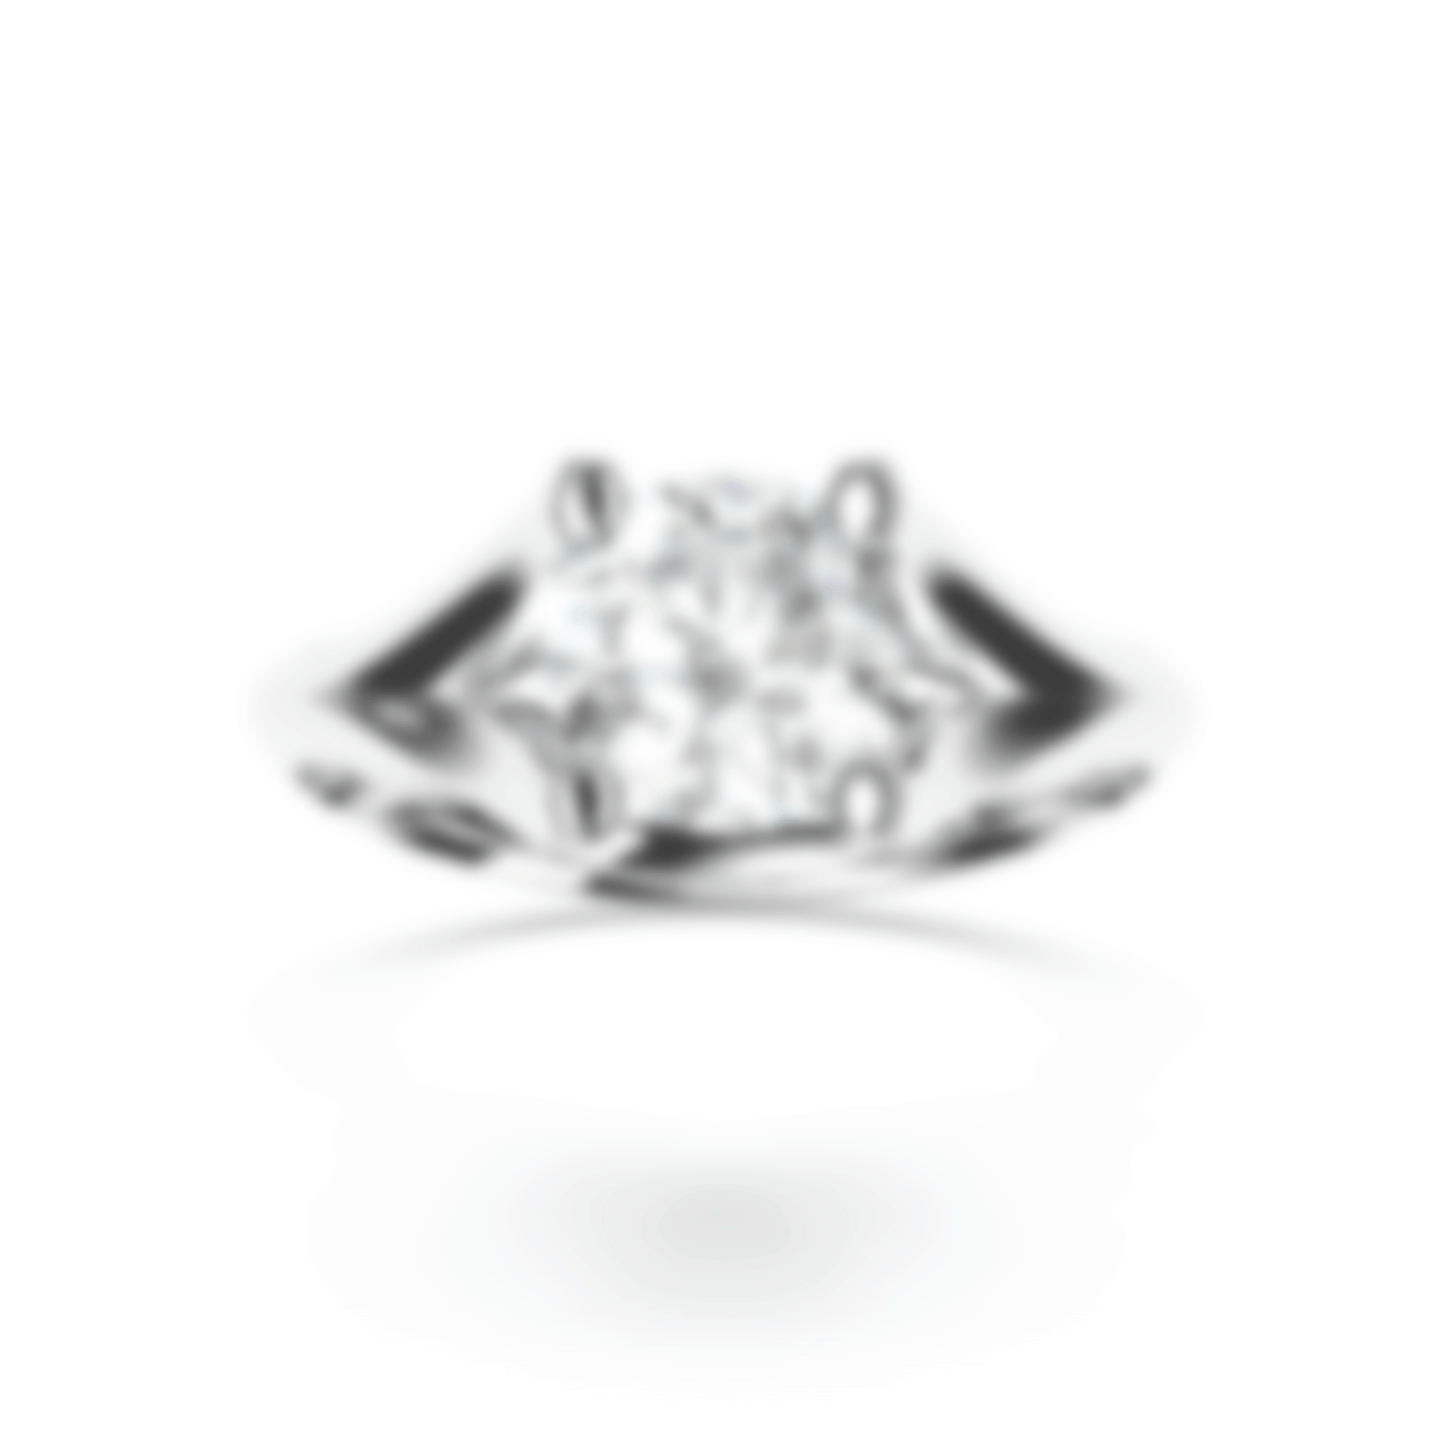 We design the perfect ring with you